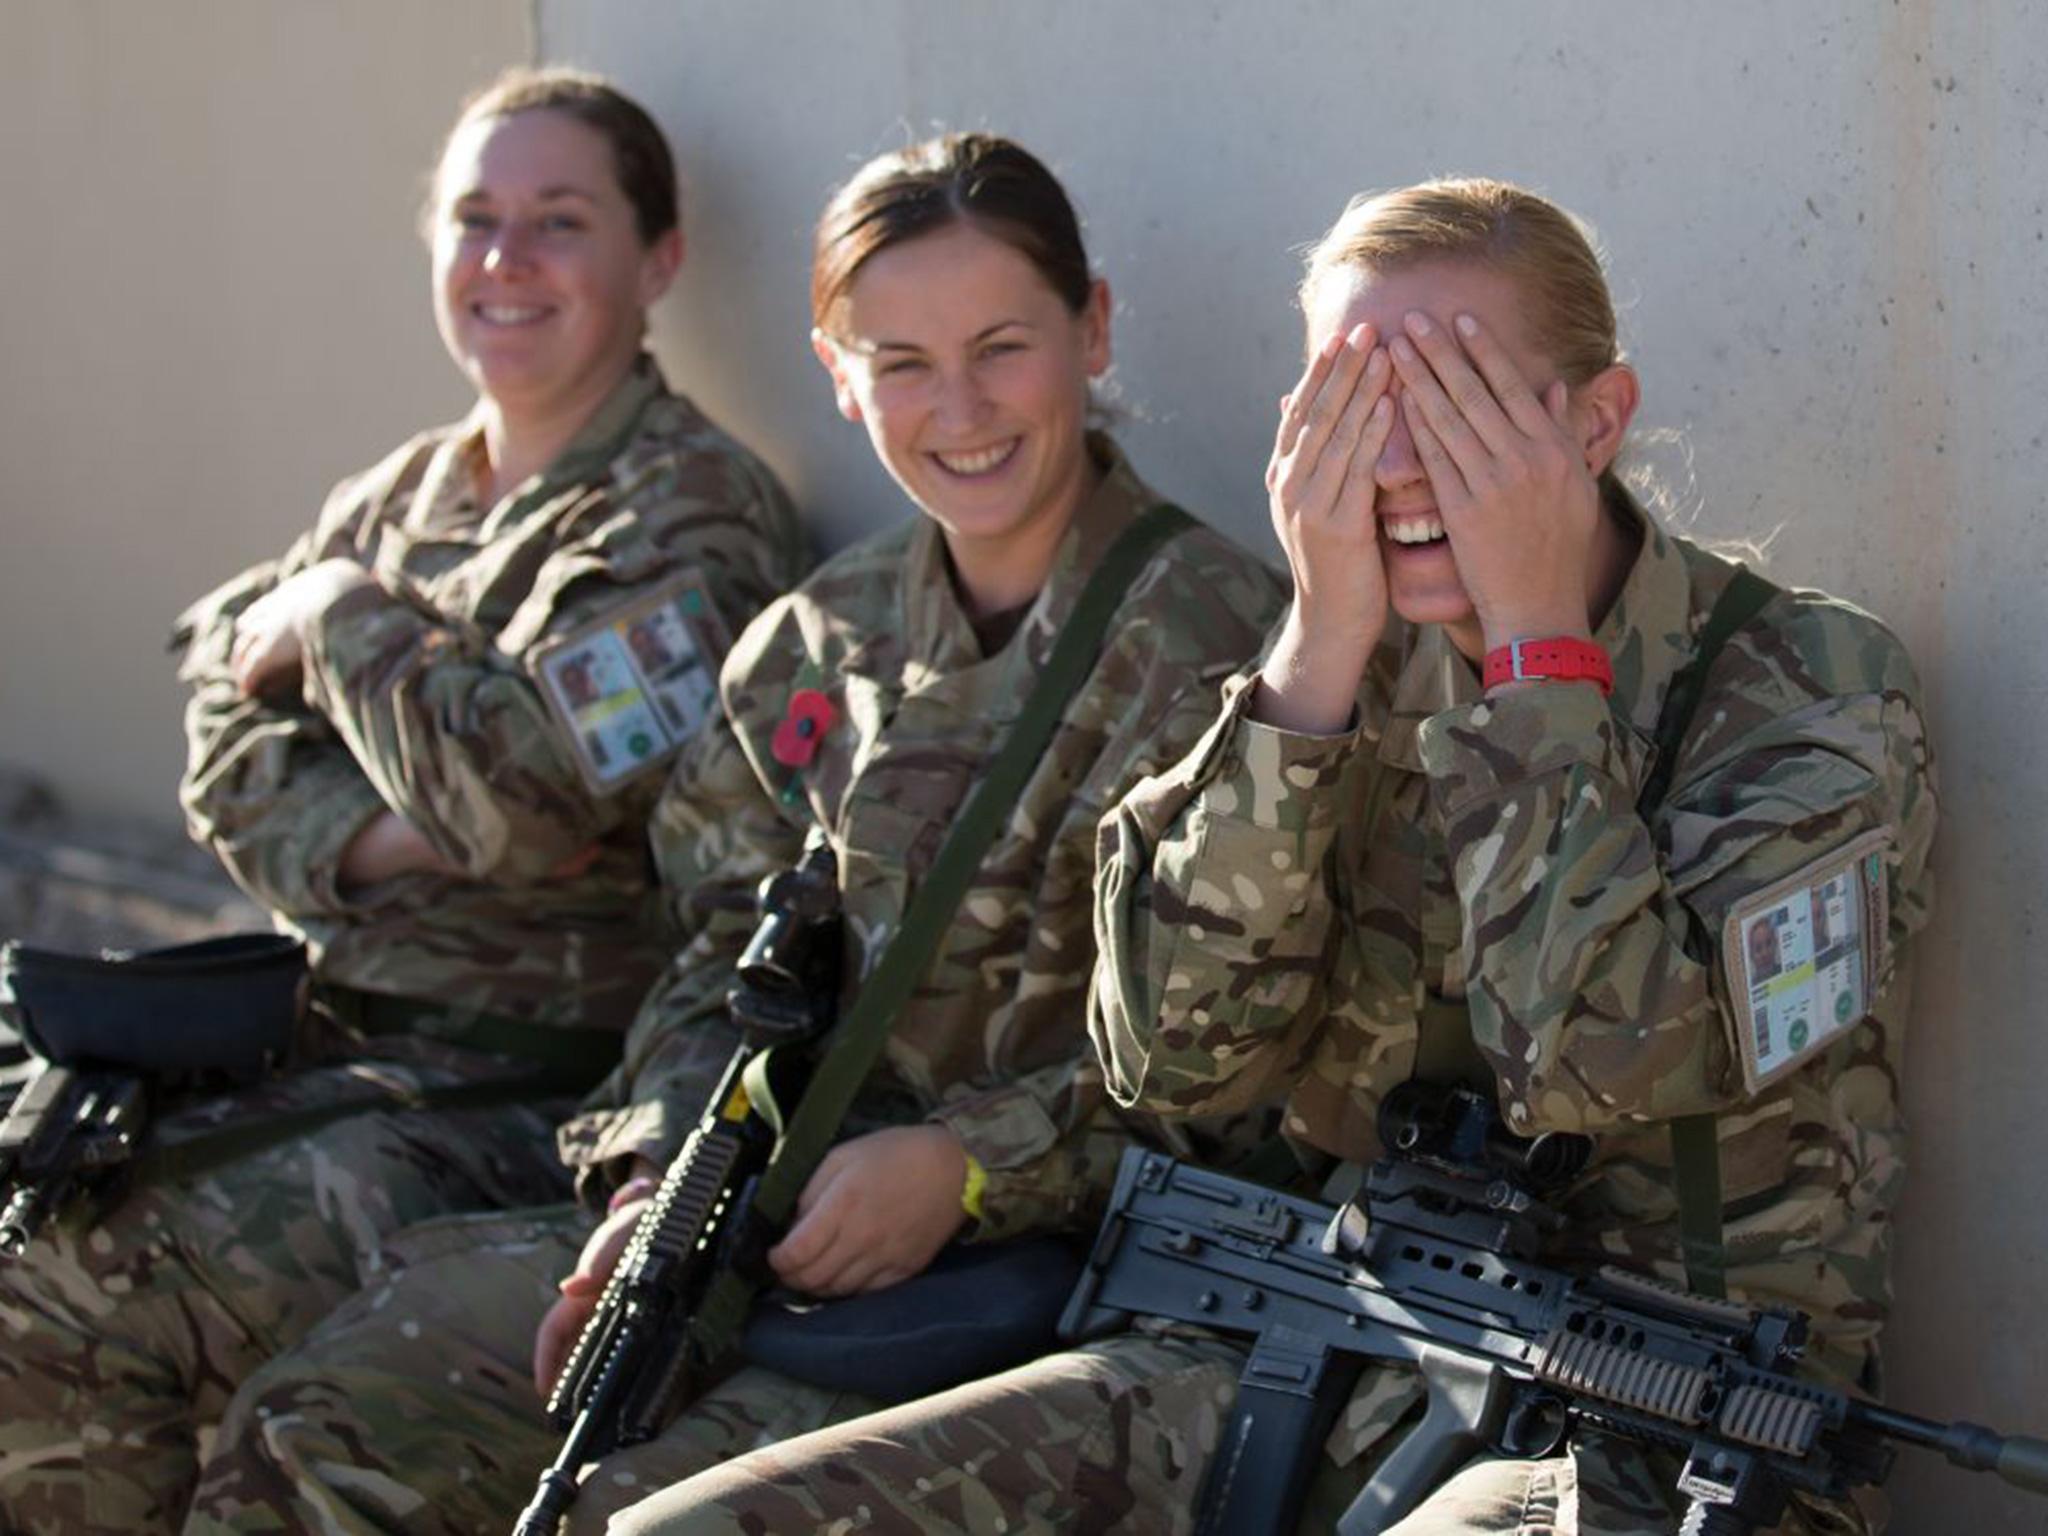 I Trained With The Sas But The Female Training Programme Was Abandoned